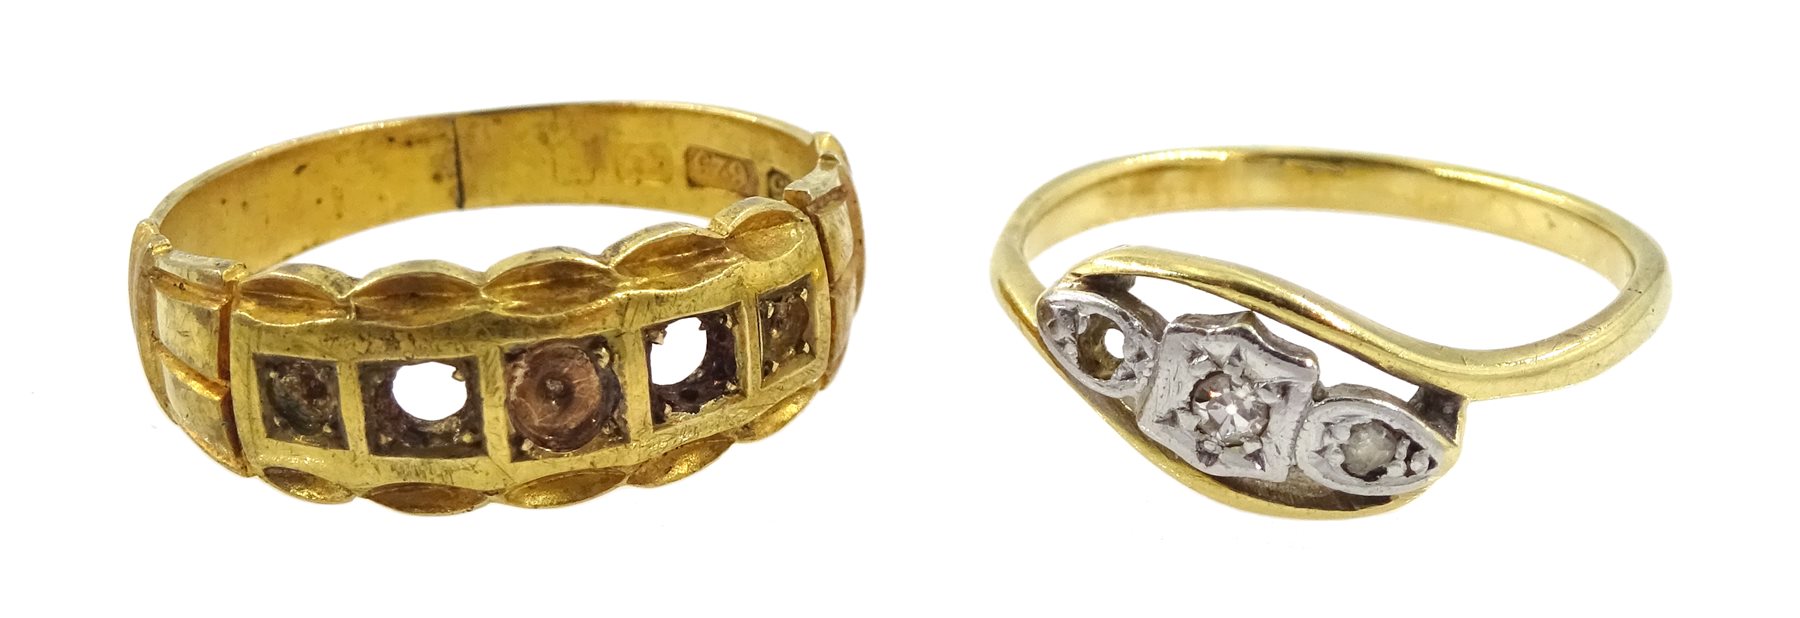 15ct gold ring hallmarked, 18ct gold diamond set ring and an early 20th century 9ct rose gold ladies - Image 2 of 9